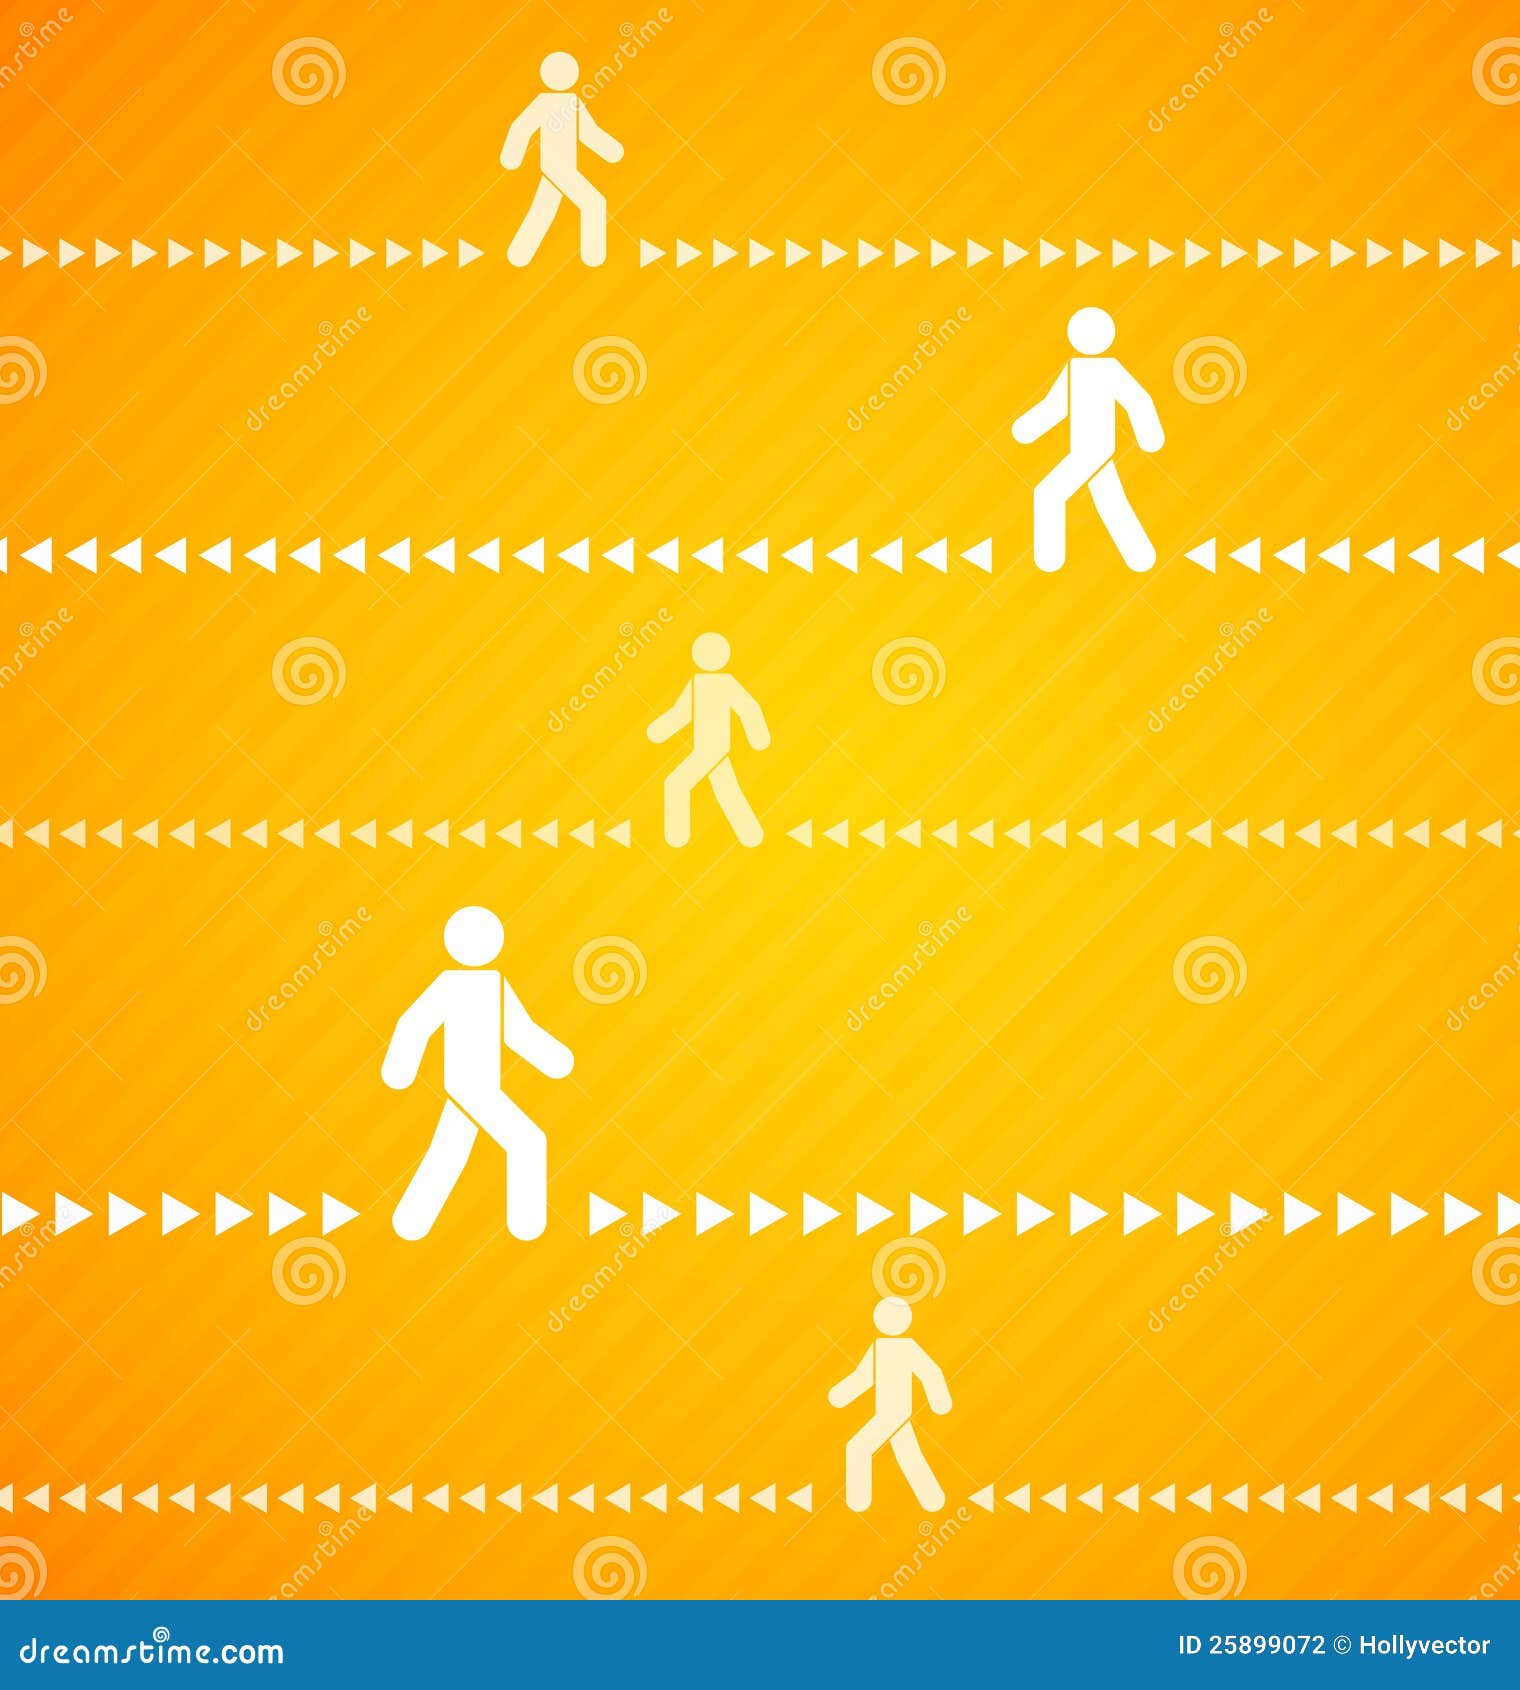 yellow walk background with stripes